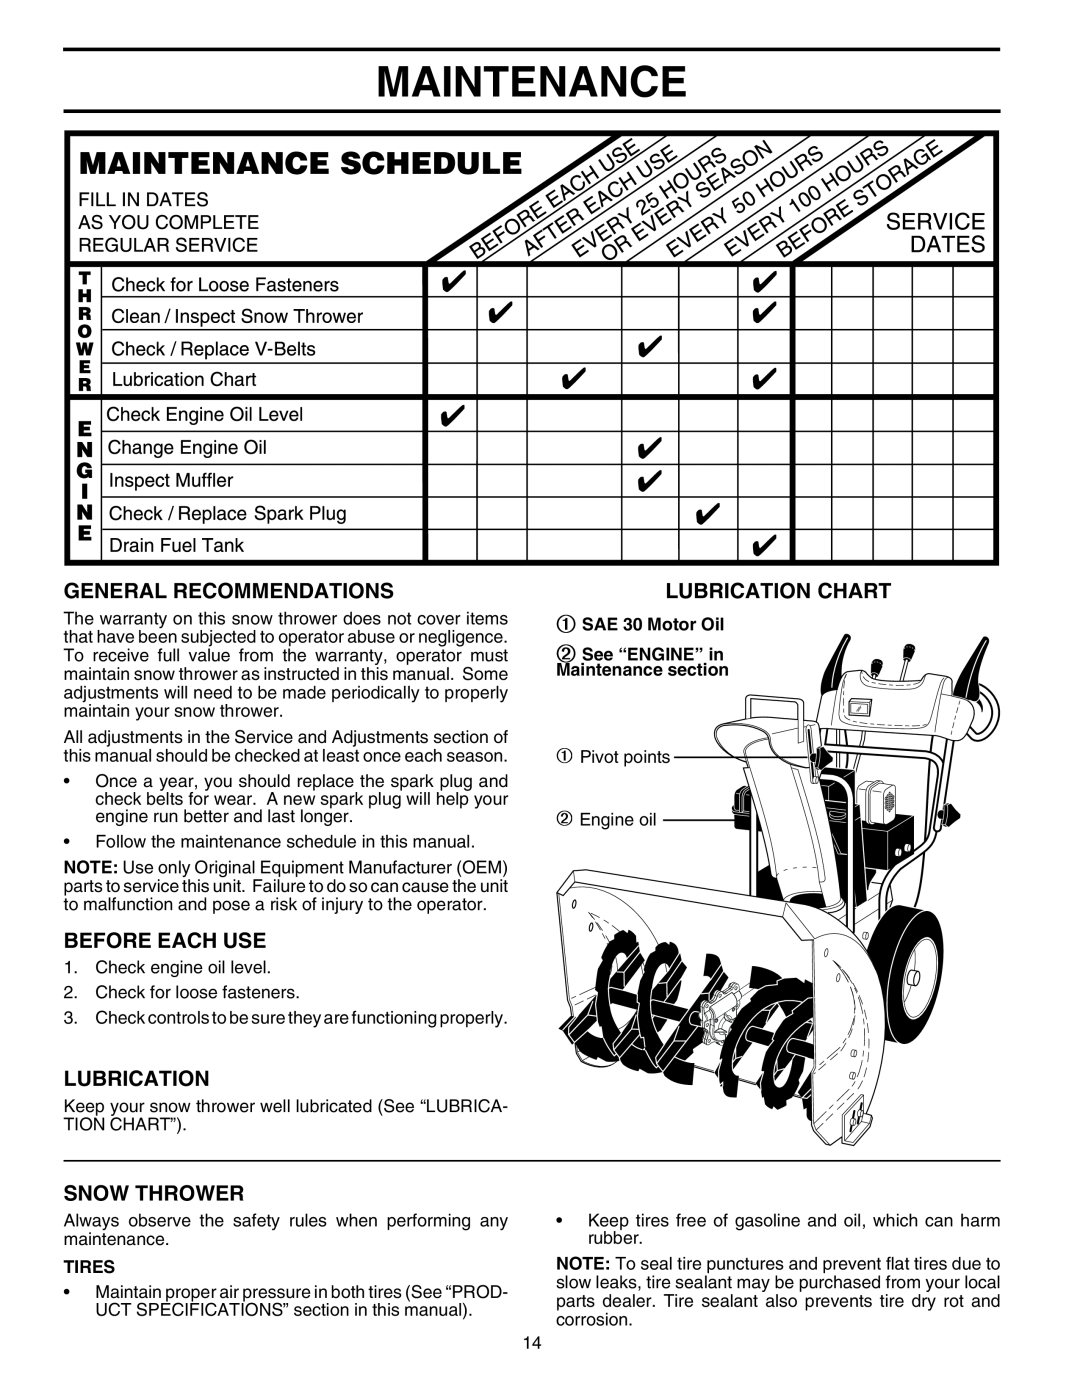 Husqvarna 8024ST Maintenance, General Recommendations, Before Each Use, Snow Thrower, Lubrication Chart, Tires 